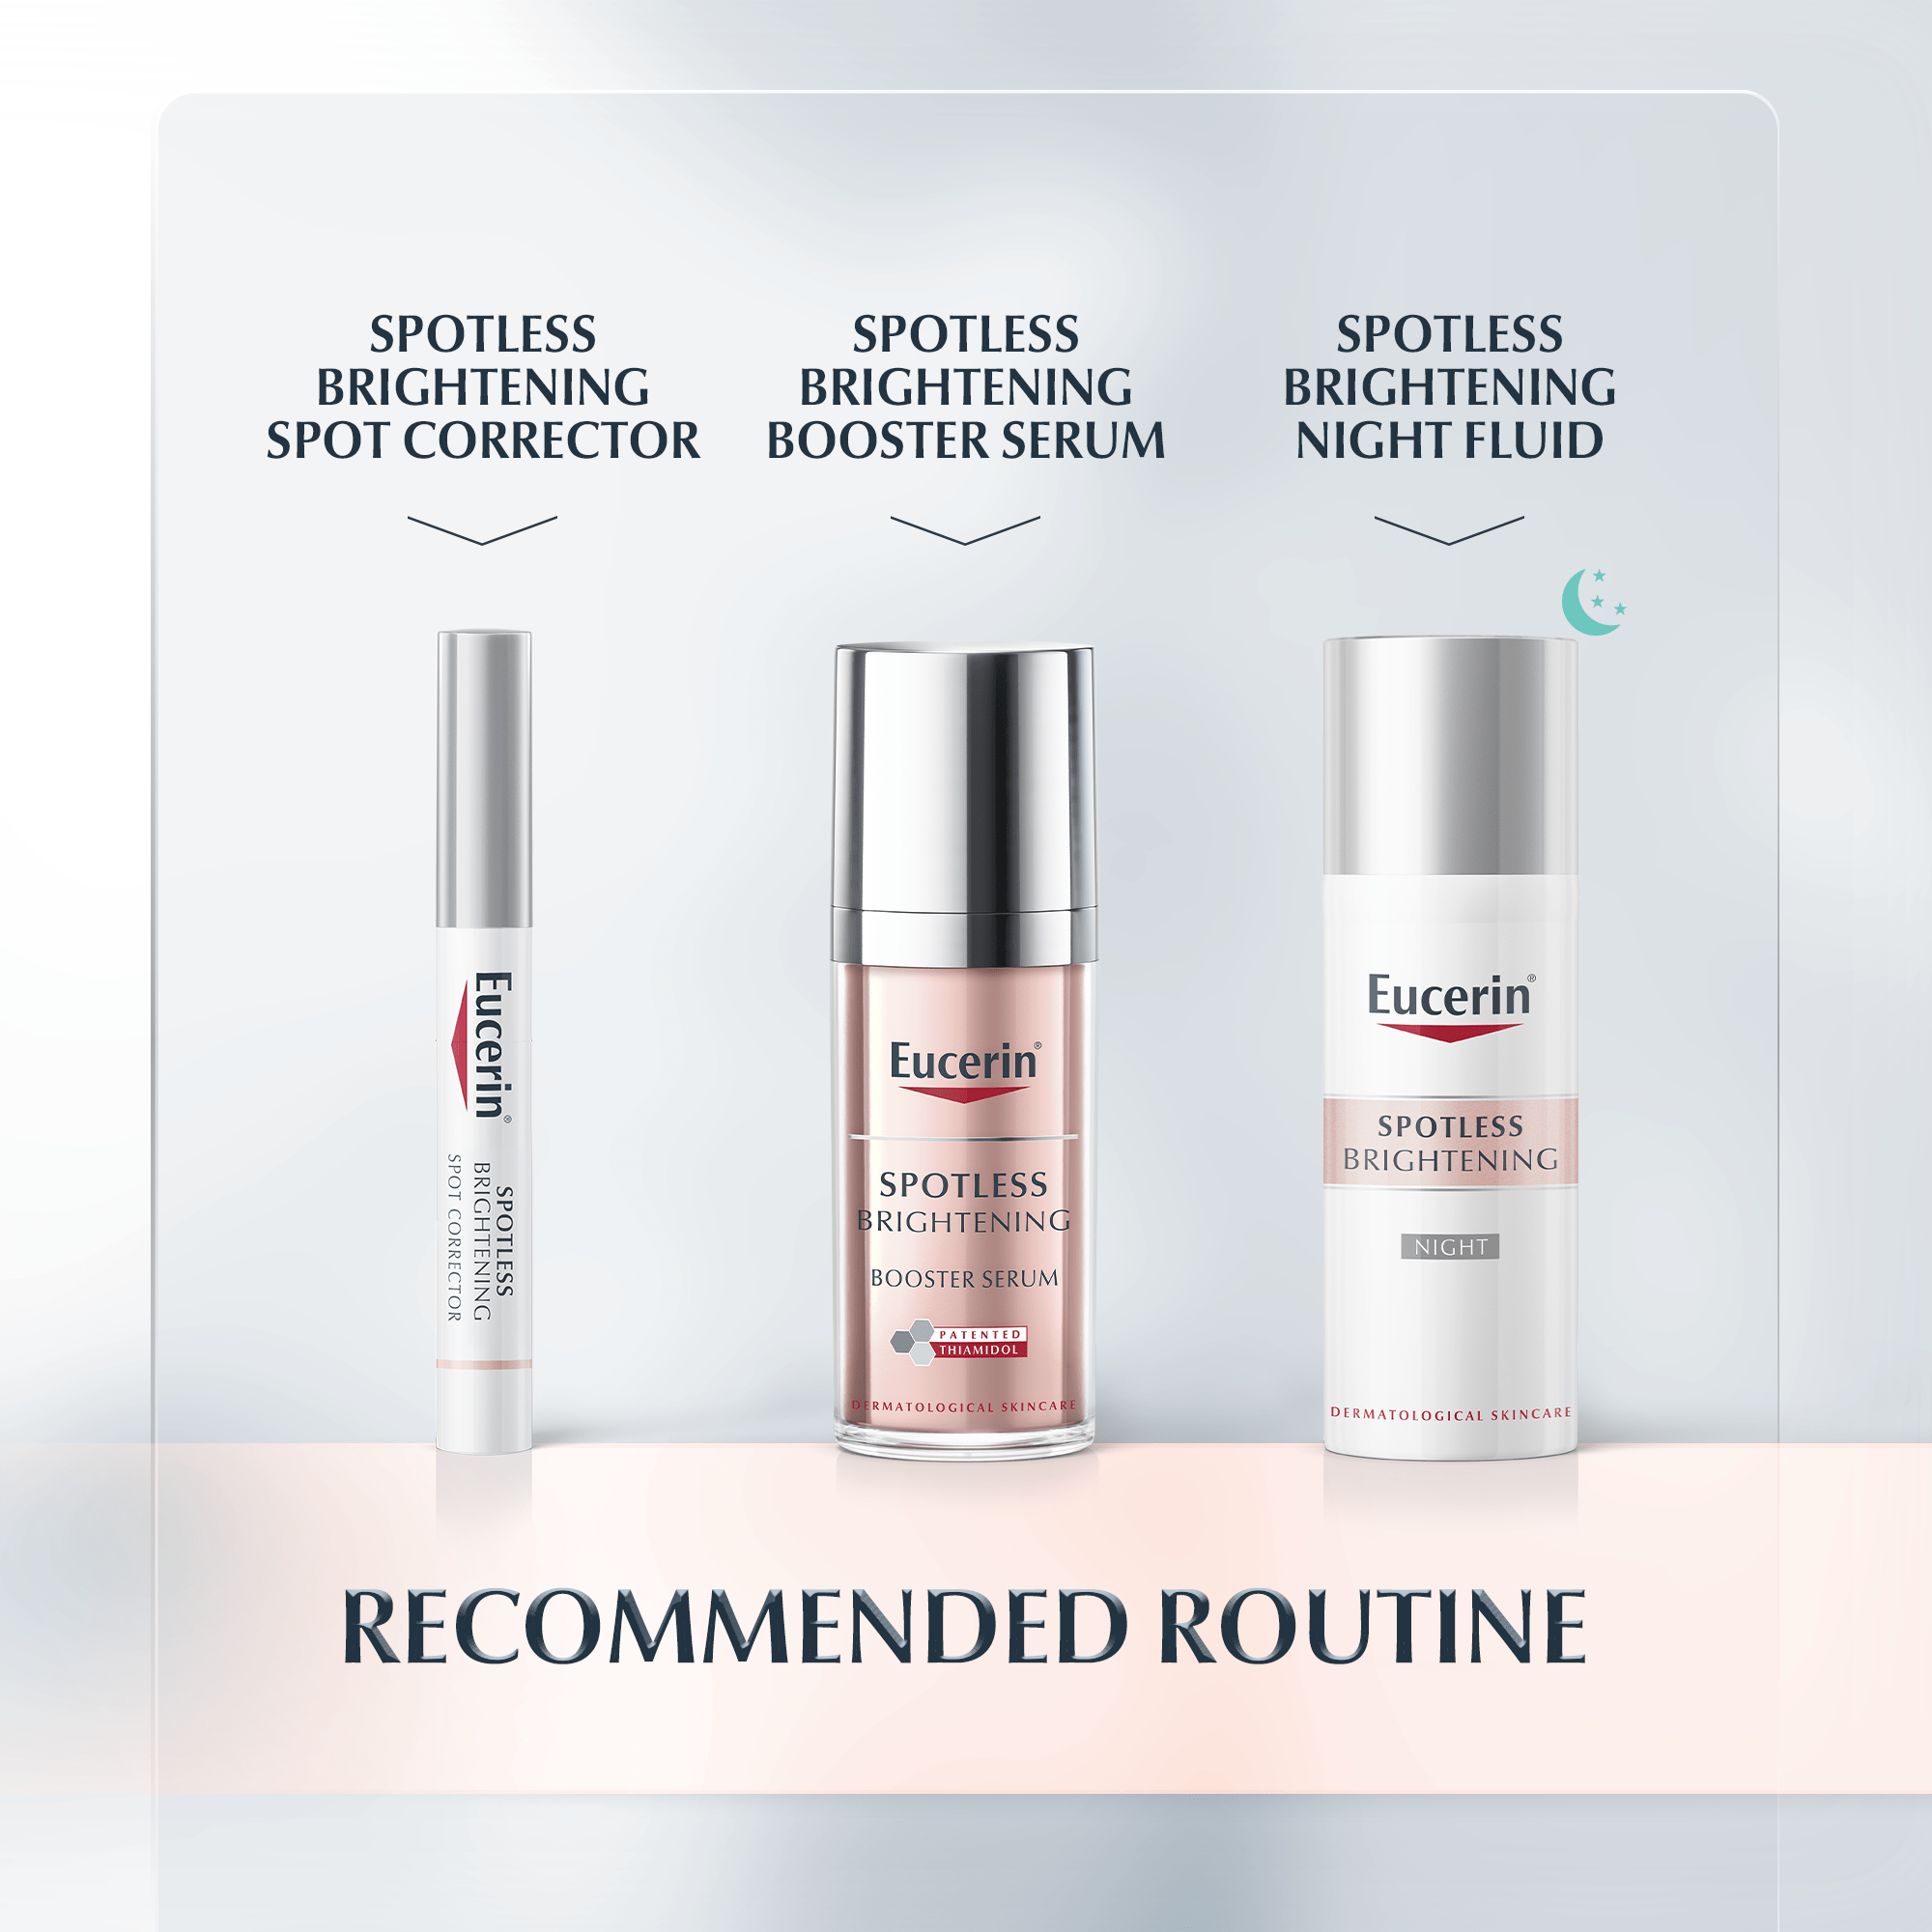 Recommended Routine for Spotless Brightening Spotless range